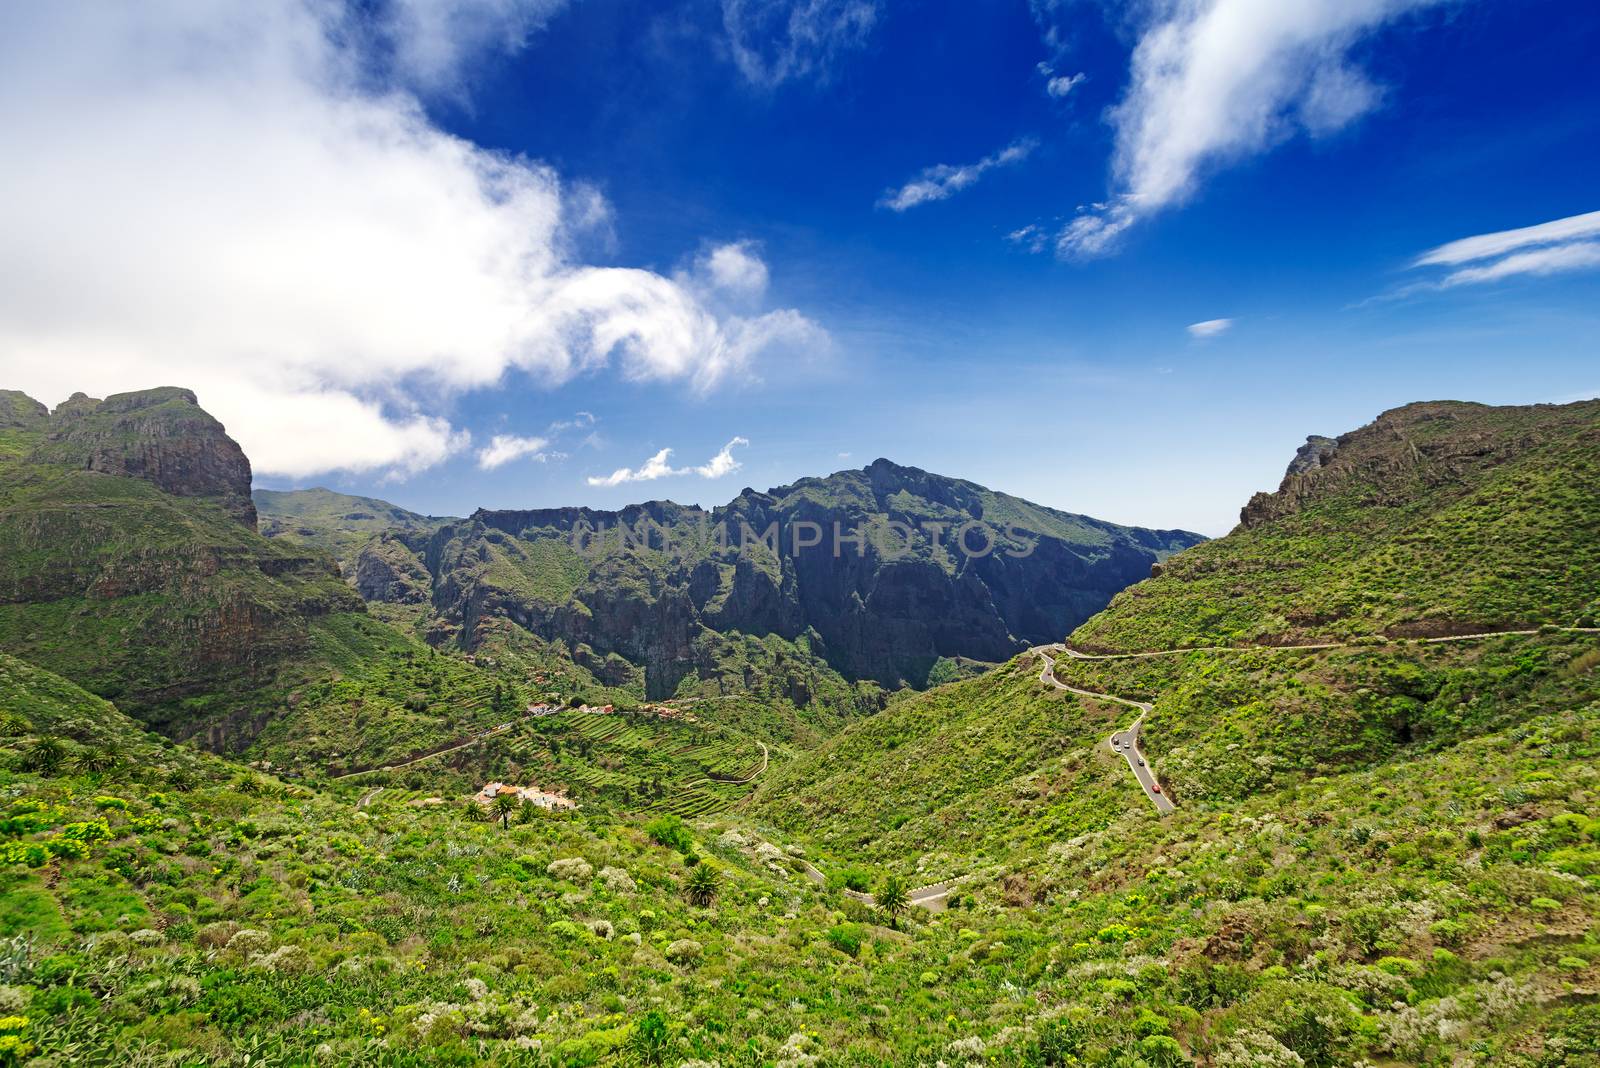 View on road near Masca village, Canary Islands, Spain